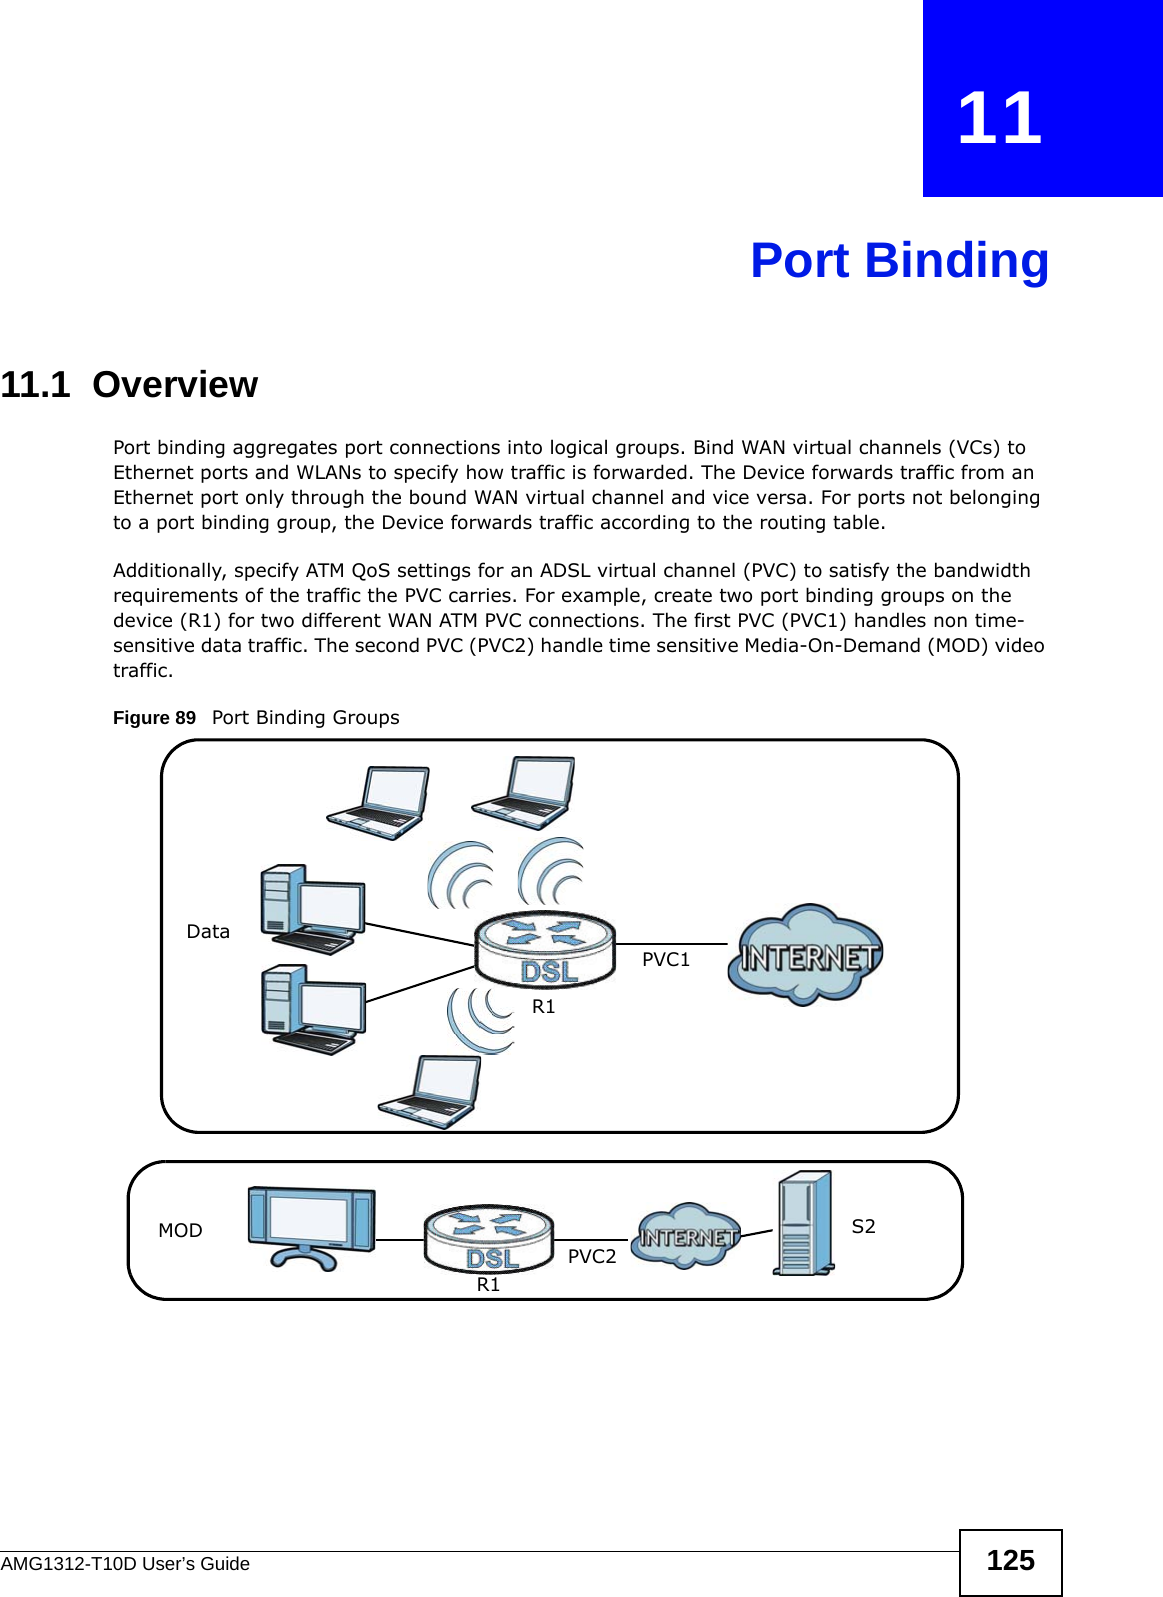 AMG1312-T10D User’s Guide 125CHAPTER   11Port Binding11.1  OverviewPort binding aggregates port connections into logical groups. Bind WAN virtual channels (VCs) to Ethernet ports and WLANs to specify how traffic is forwarded. The Device forwards traffic from an Ethernet port only through the bound WAN virtual channel and vice versa. For ports not belonging to a port binding group, the Device forwards traffic according to the routing table.Additionally, specify ATM QoS settings for an ADSL virtual channel (PVC) to satisfy the bandwidth requirements of the traffic the PVC carries. For example, create two port binding groups on the device (R1) for two different WAN ATM PVC connections. The first PVC (PVC1) handles non time-sensitive data traffic. The second PVC (PVC2) handle time sensitive Media-On-Demand (MOD) video traffic.   Figure 89   Port Binding GroupsS2R1R1MODDataPVC1PVC2